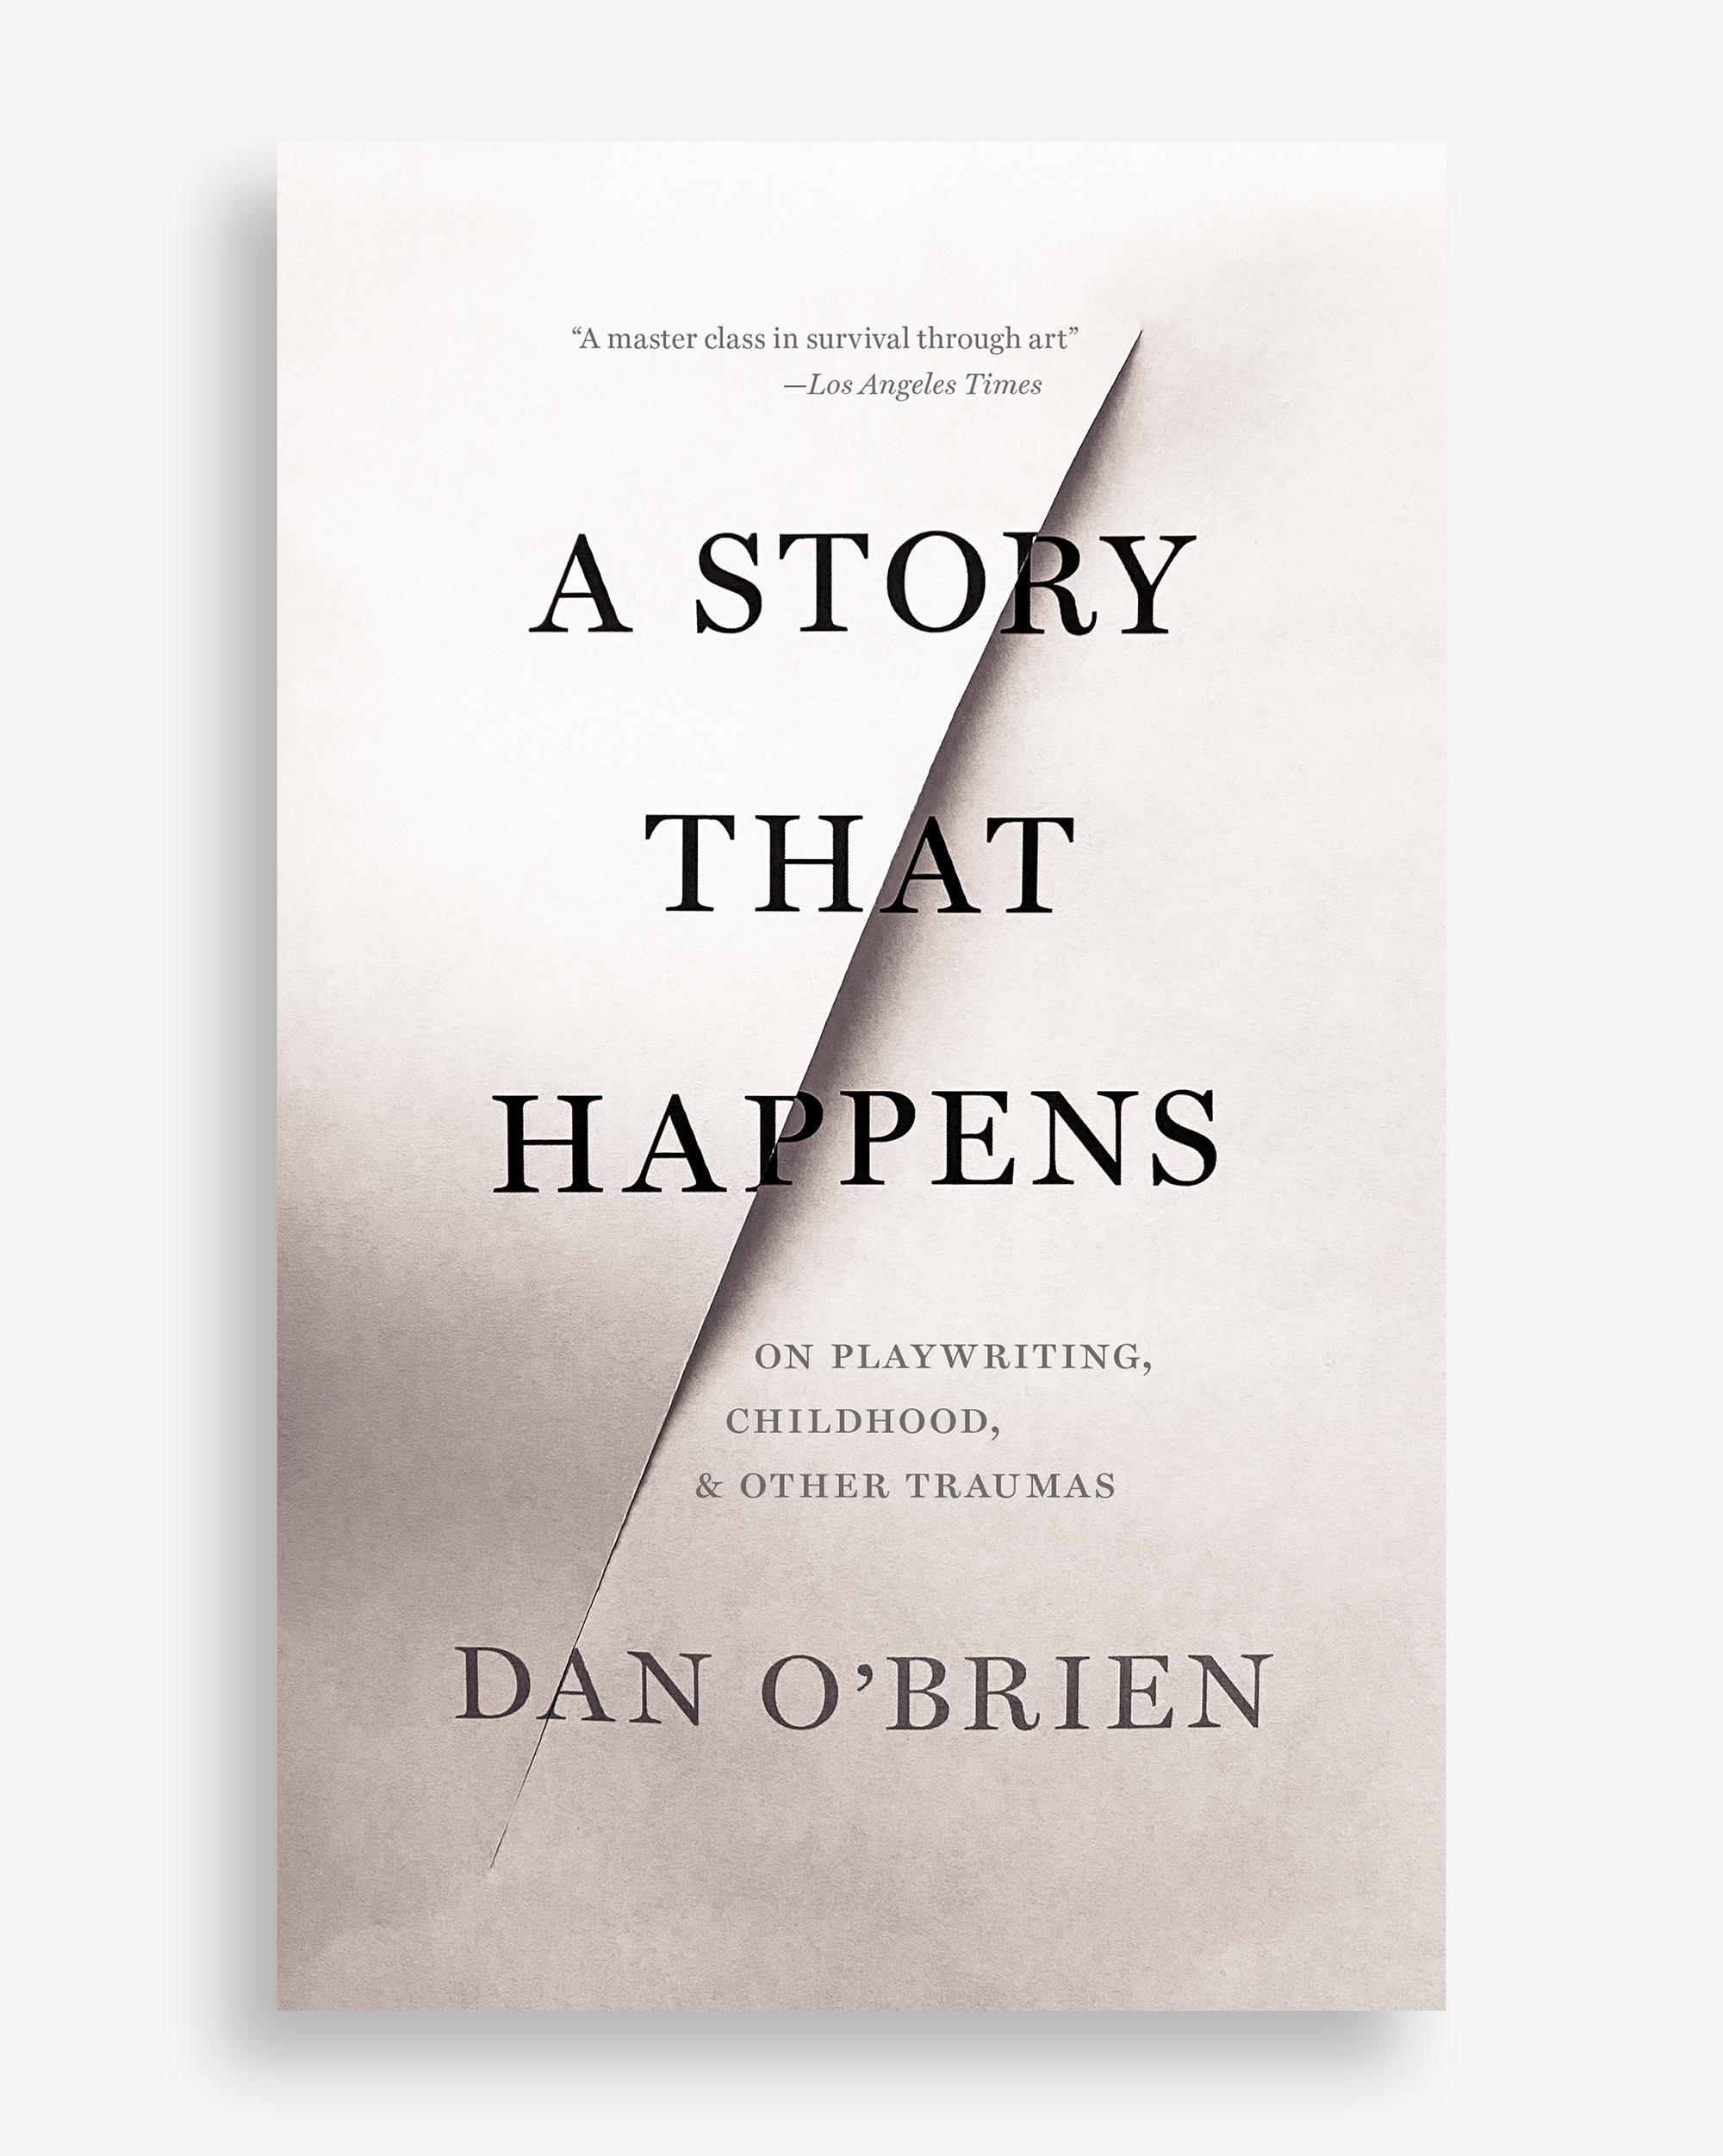 A book cover for "A Story that Happens."